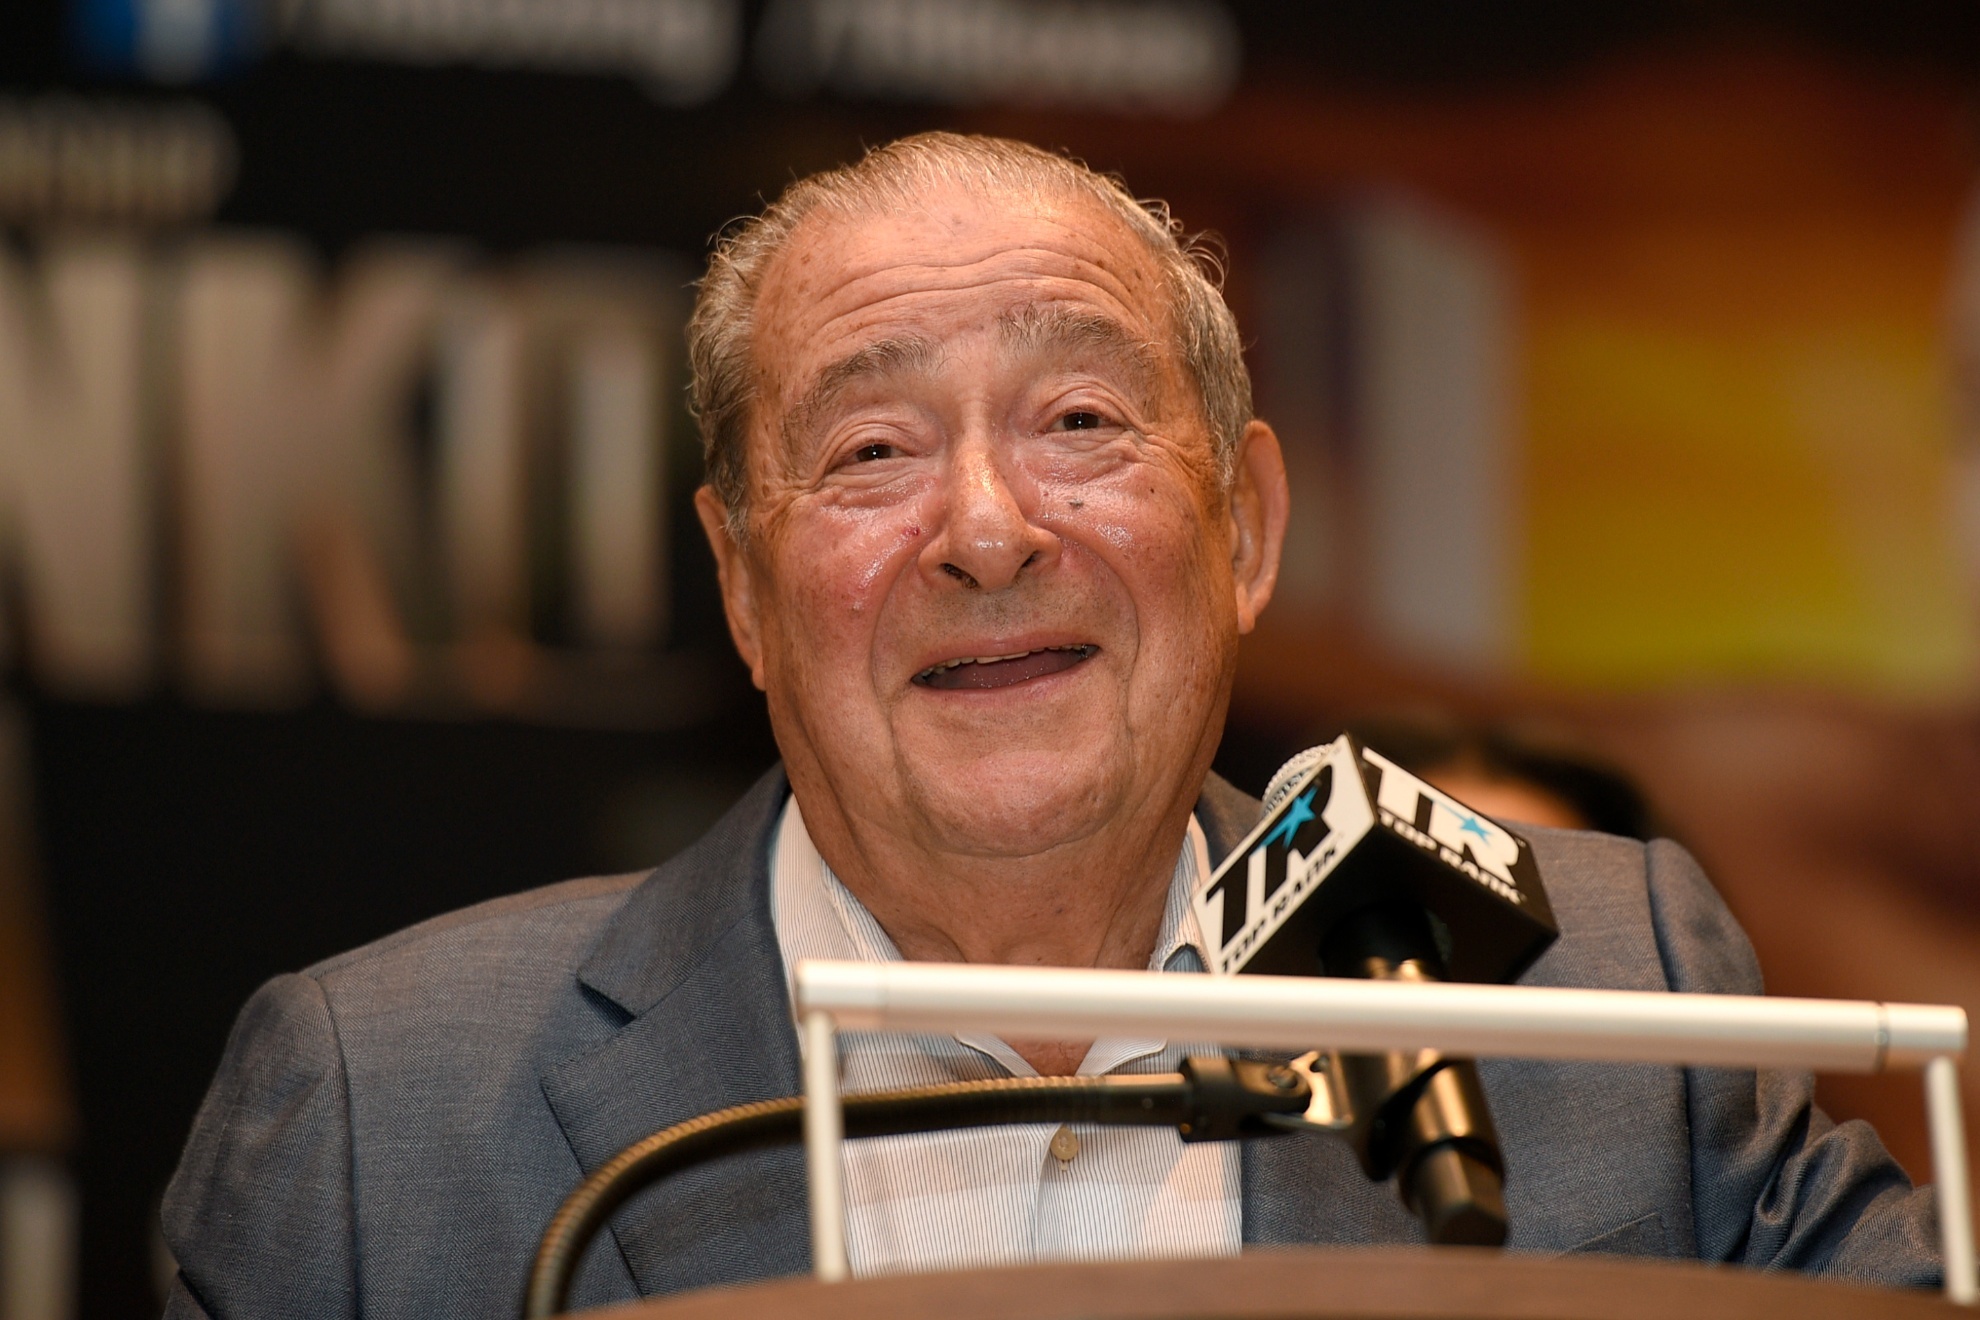 This is an April 6, 2017, file photo showing boxing promoter Bob Arum speaking at a boxing press conference in Oxon Hill, Md. Arum says he plans to stage a card of five fights on June 9 at the MGM Grand. Its the first of a series of fights over the next two months at the Las Vegas hotel. A second fight card will be held two nights later. ESPN will televise both cards to kick off twice weekly shows at the hotel in June and July. The fights are pending approval of the Nevada Athletic Commission.(AP Photo/Nick Wass, File)